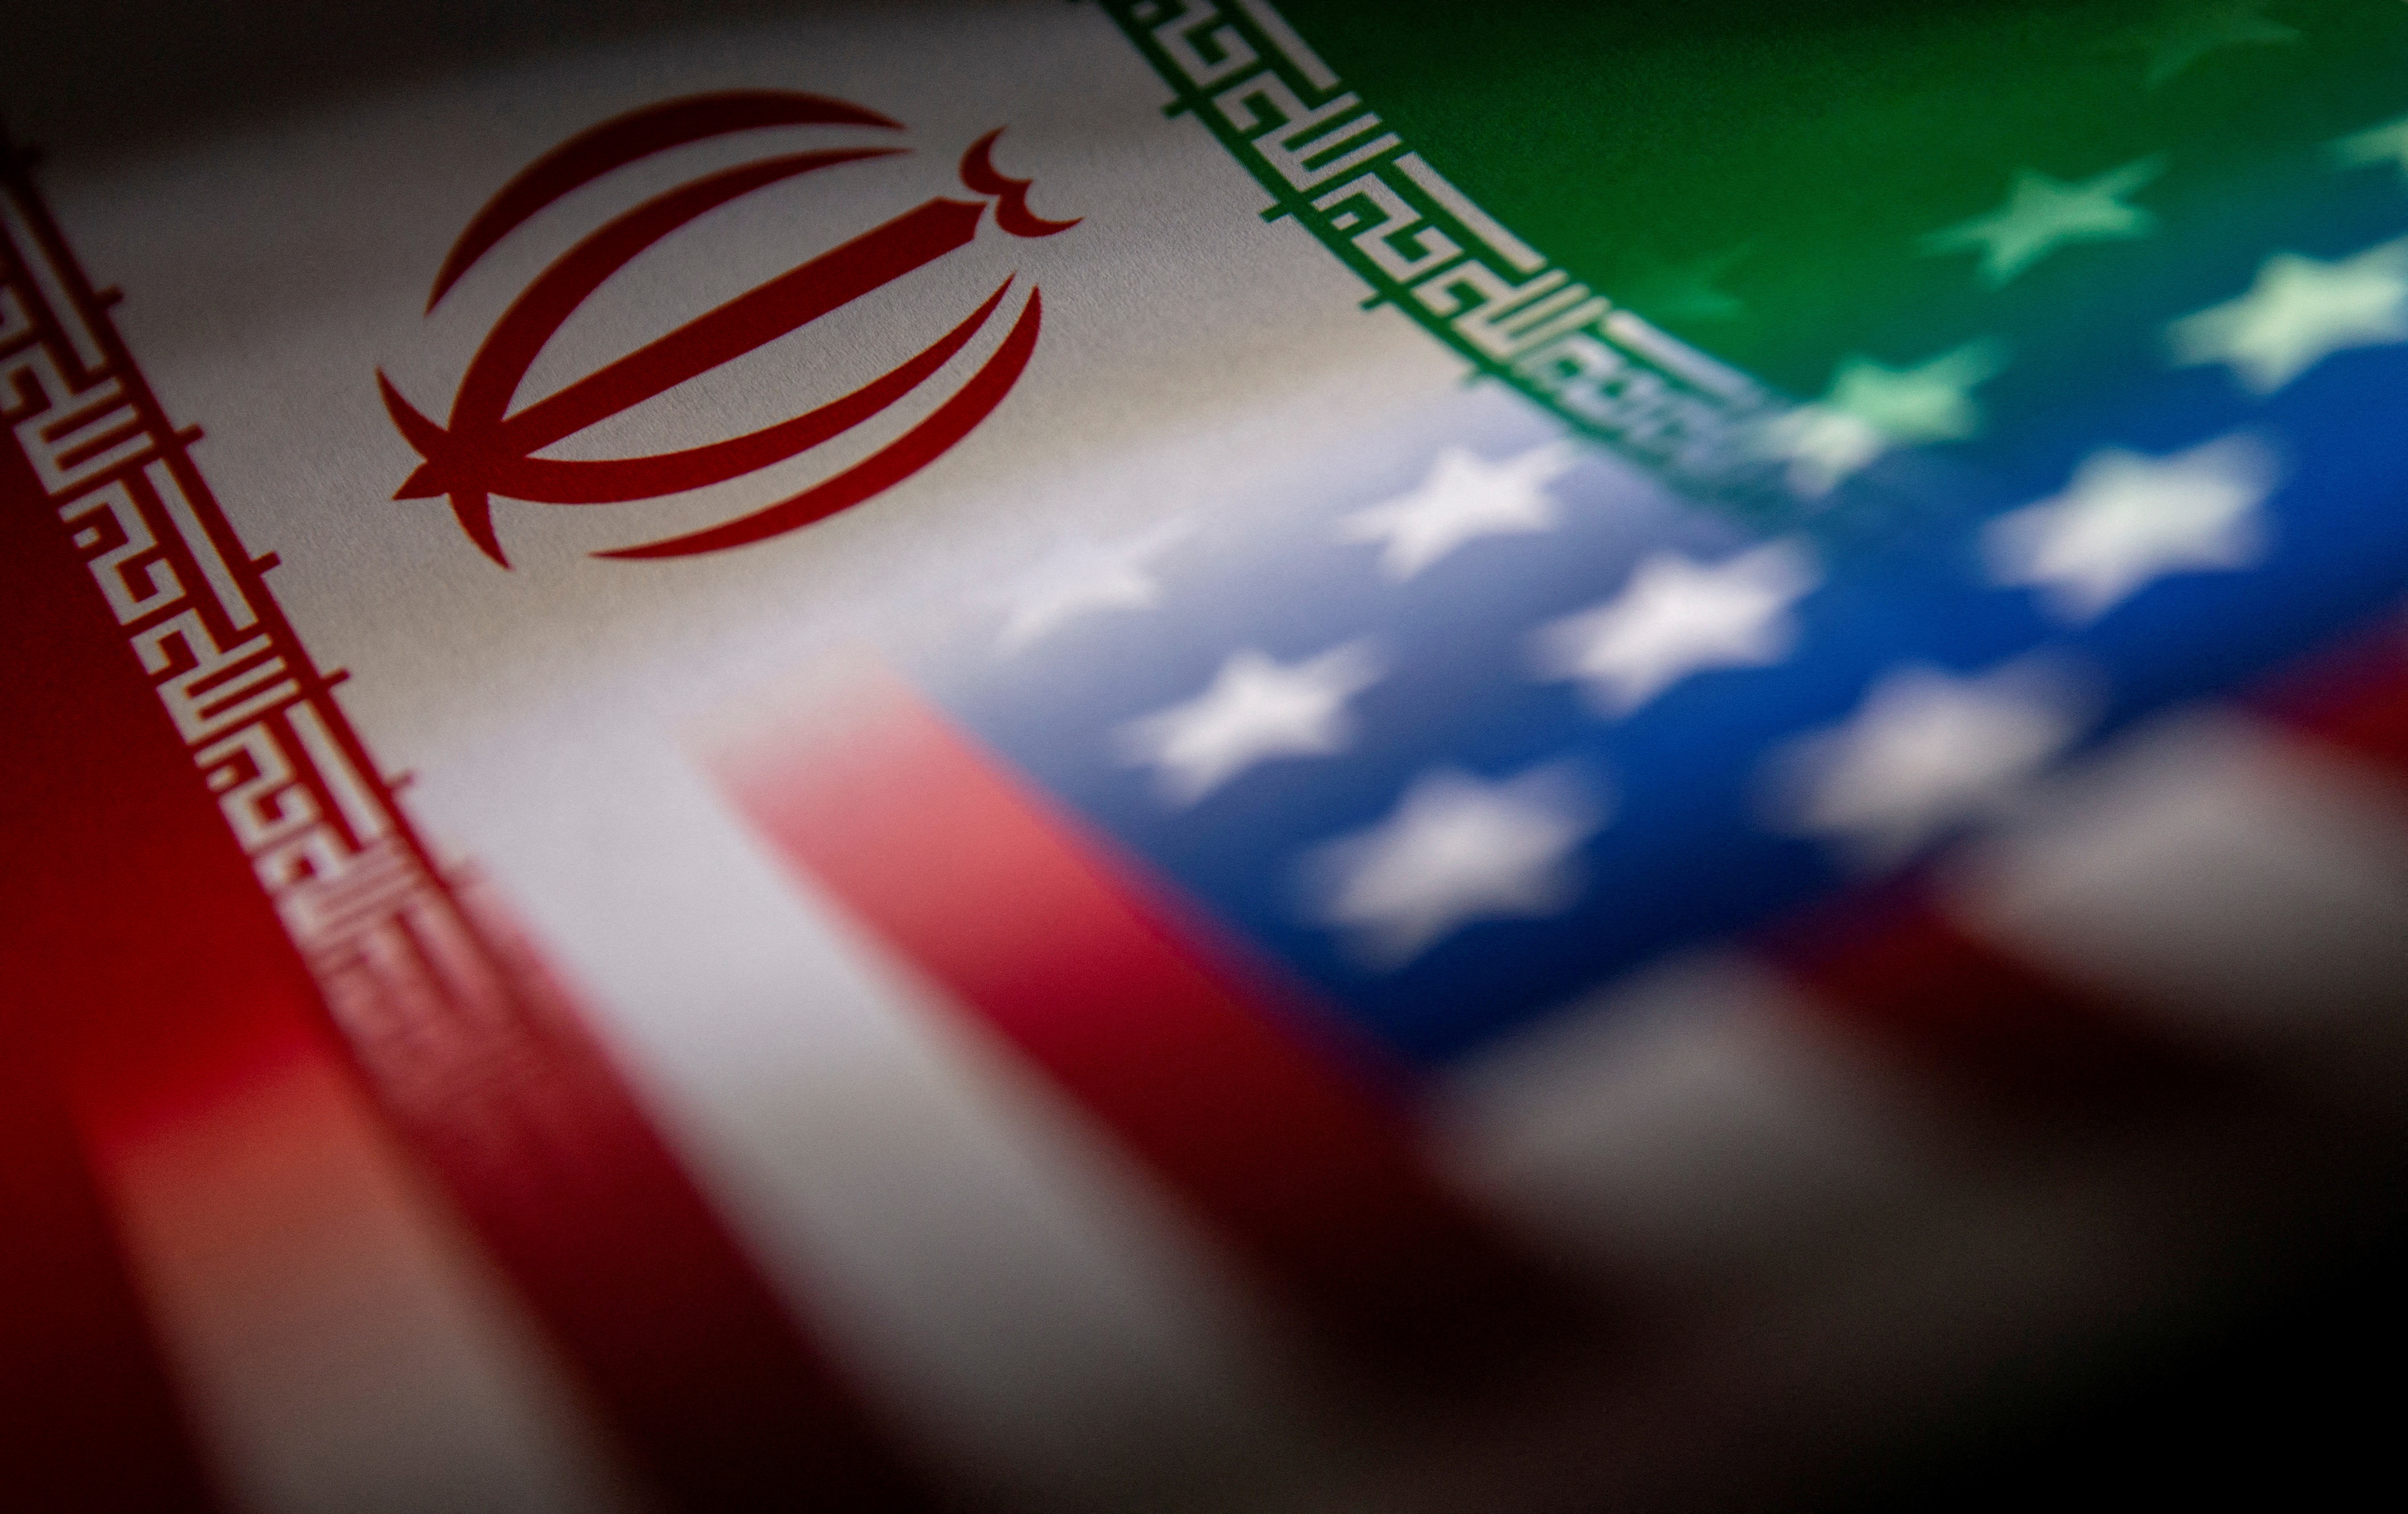 Illustration shows Iran's and U.S.' flags